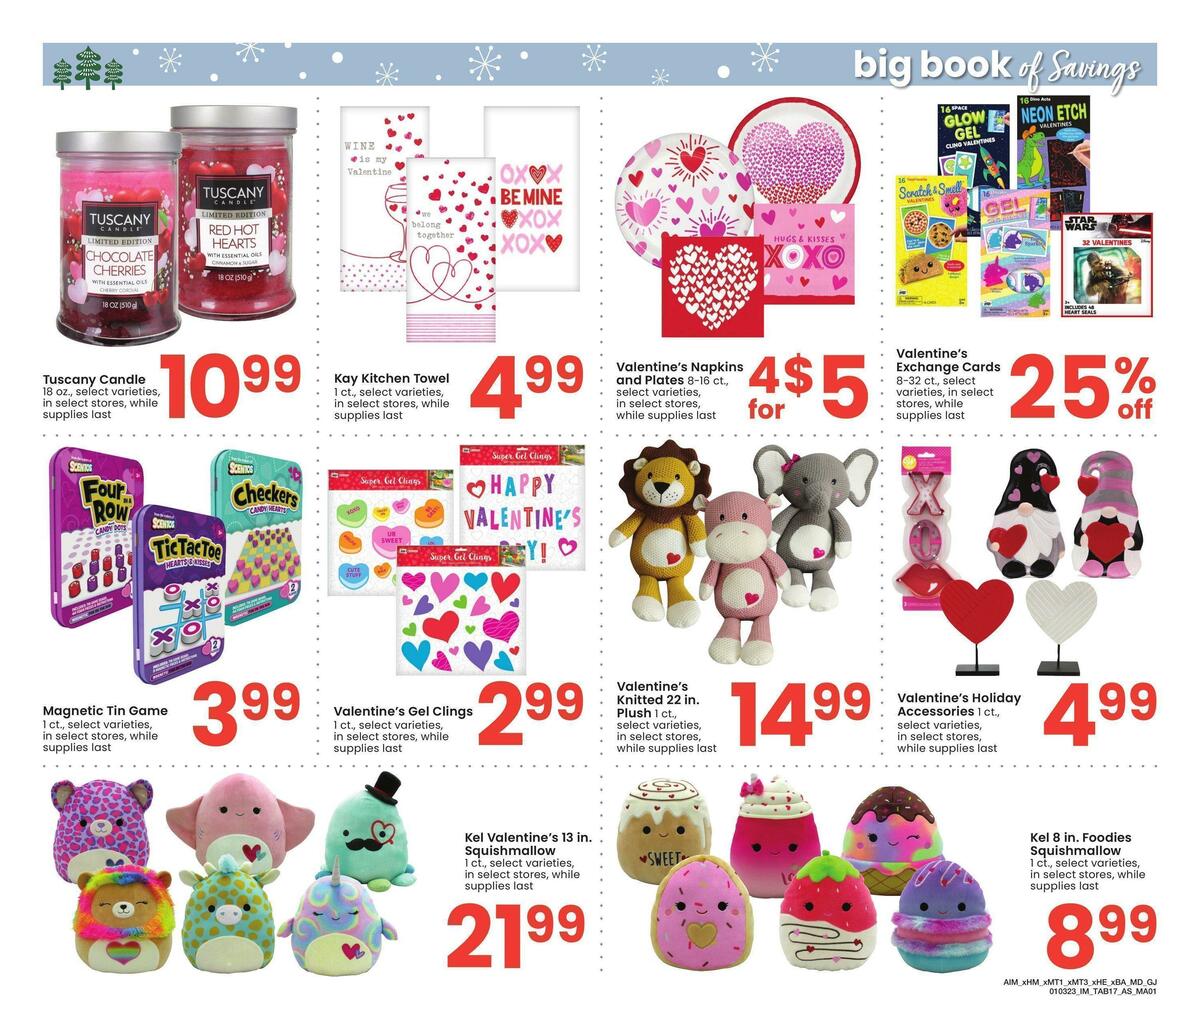 Albertsons Big Book of Savings Weekly Ad from January 3